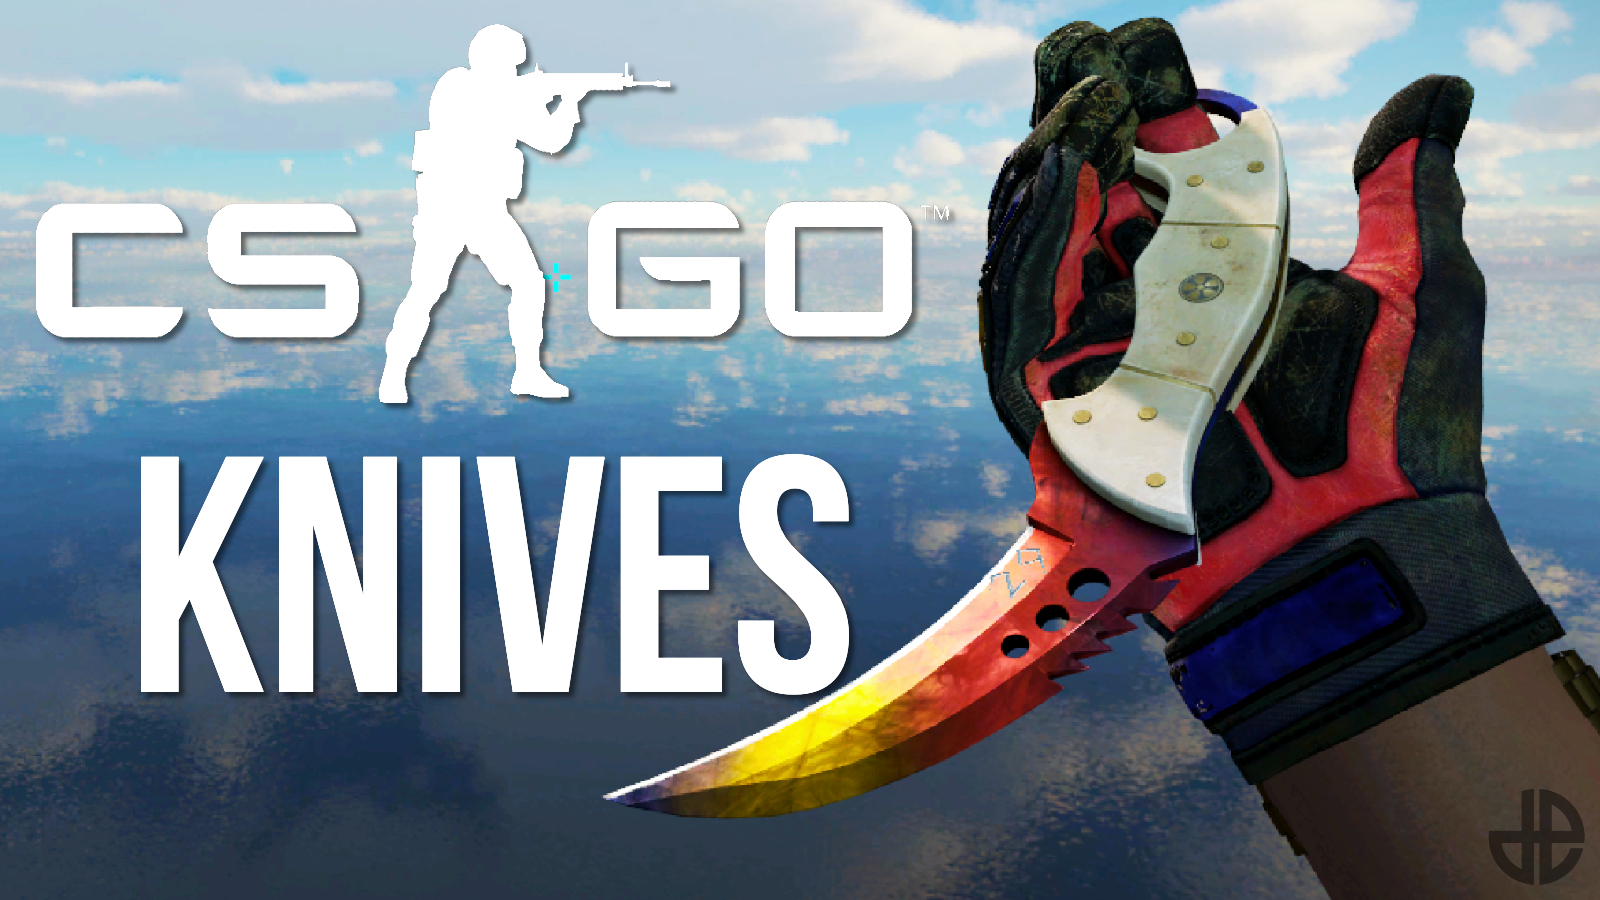 All CSGO Knives: Most expensive, cheapest, and best knives to buy - Dexerto